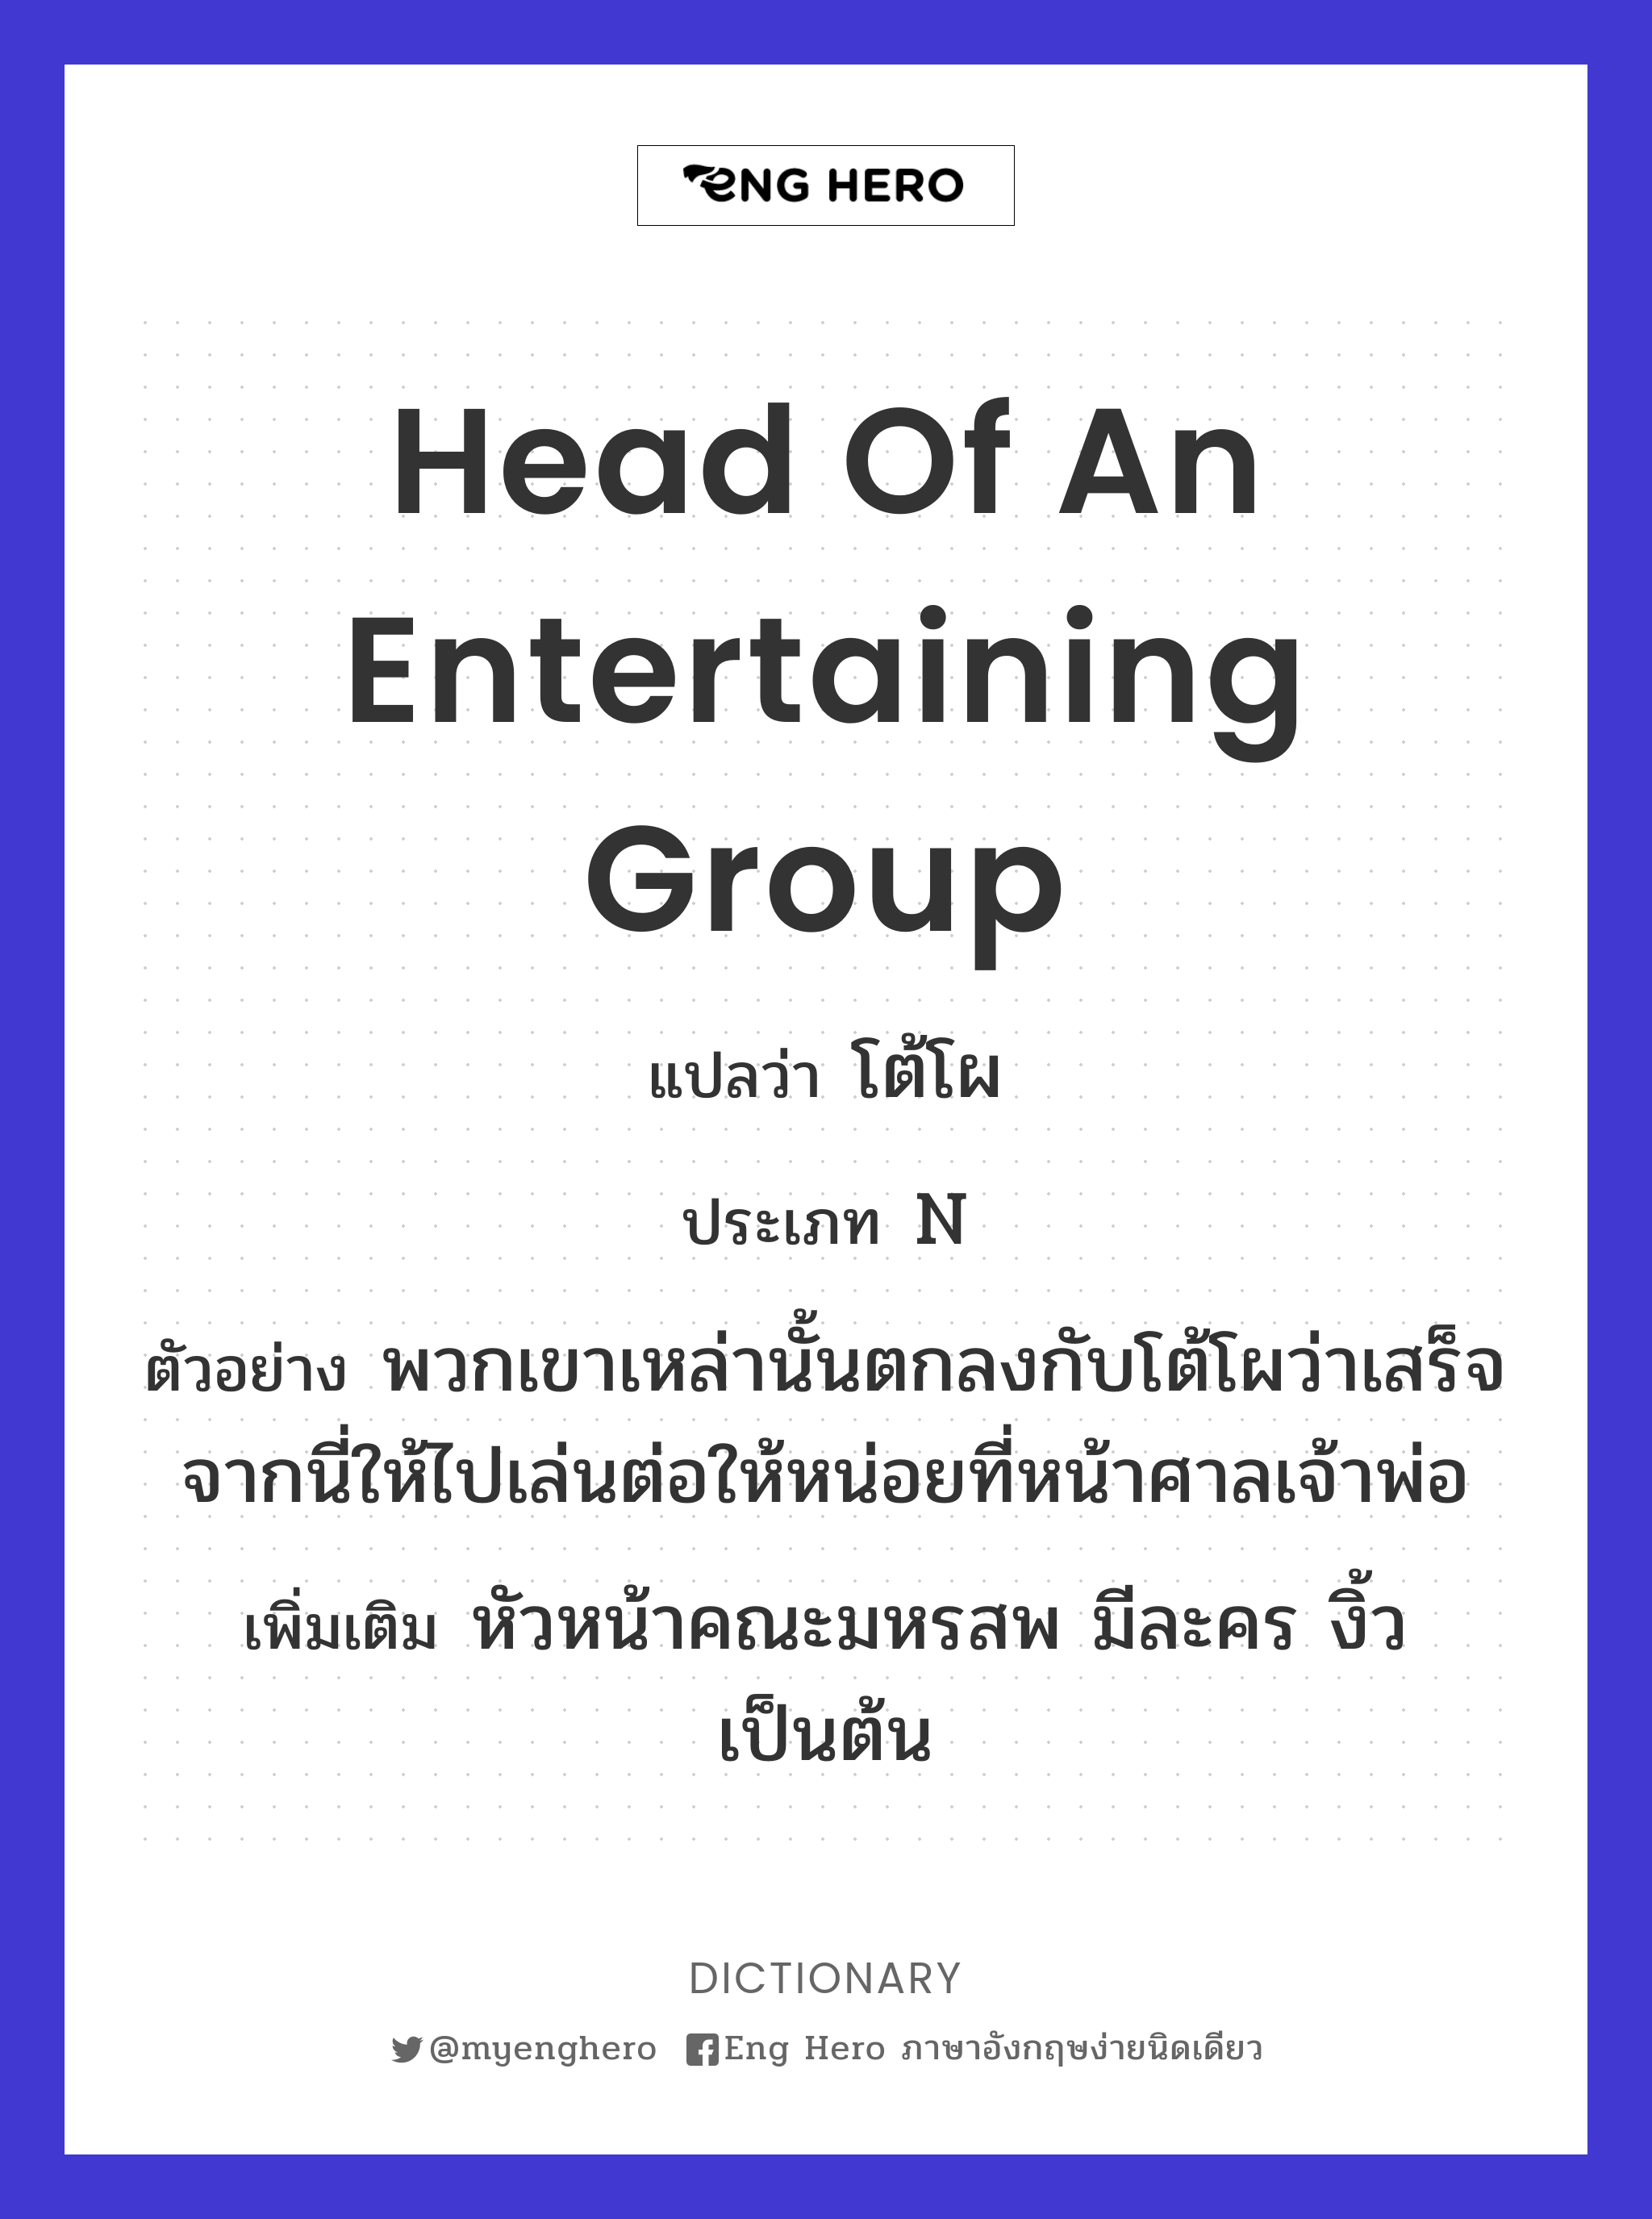 head of an entertaining group